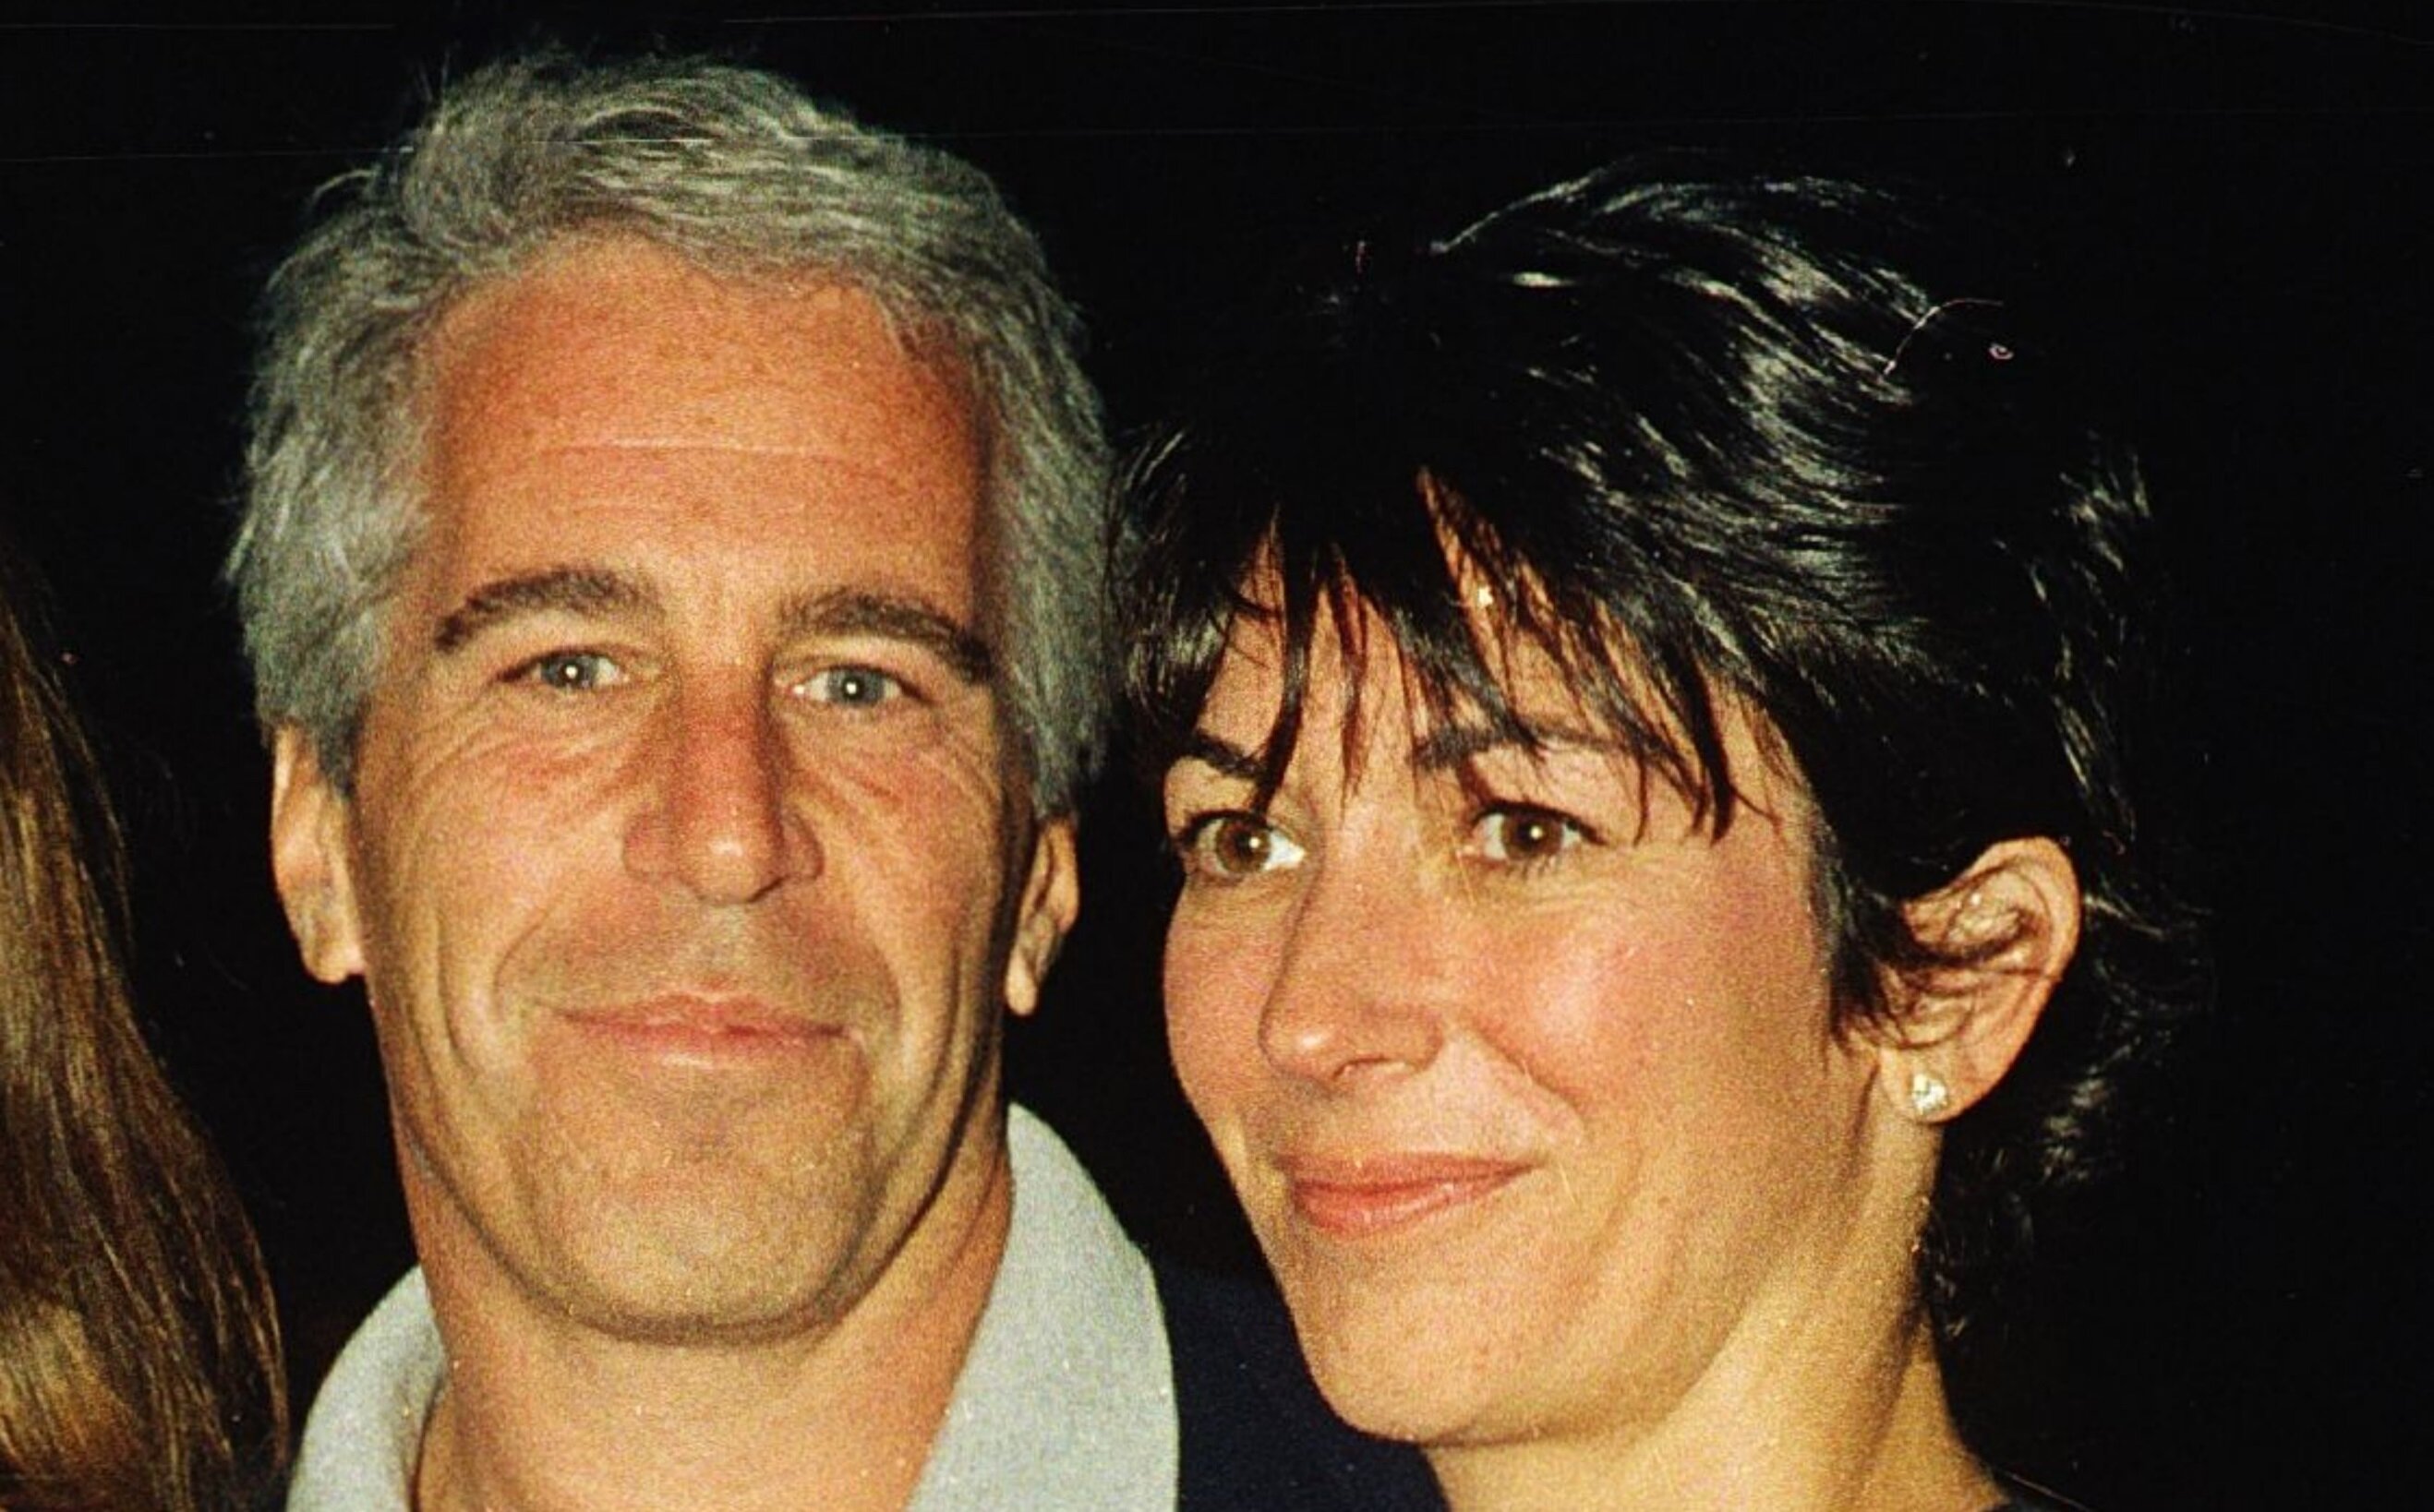 As more documents come out from Ghislaine Maxwell's 2015 lawsuit, it was revealed Maxwell denied knowing about Jeffrey Epstein and his illegal activities.